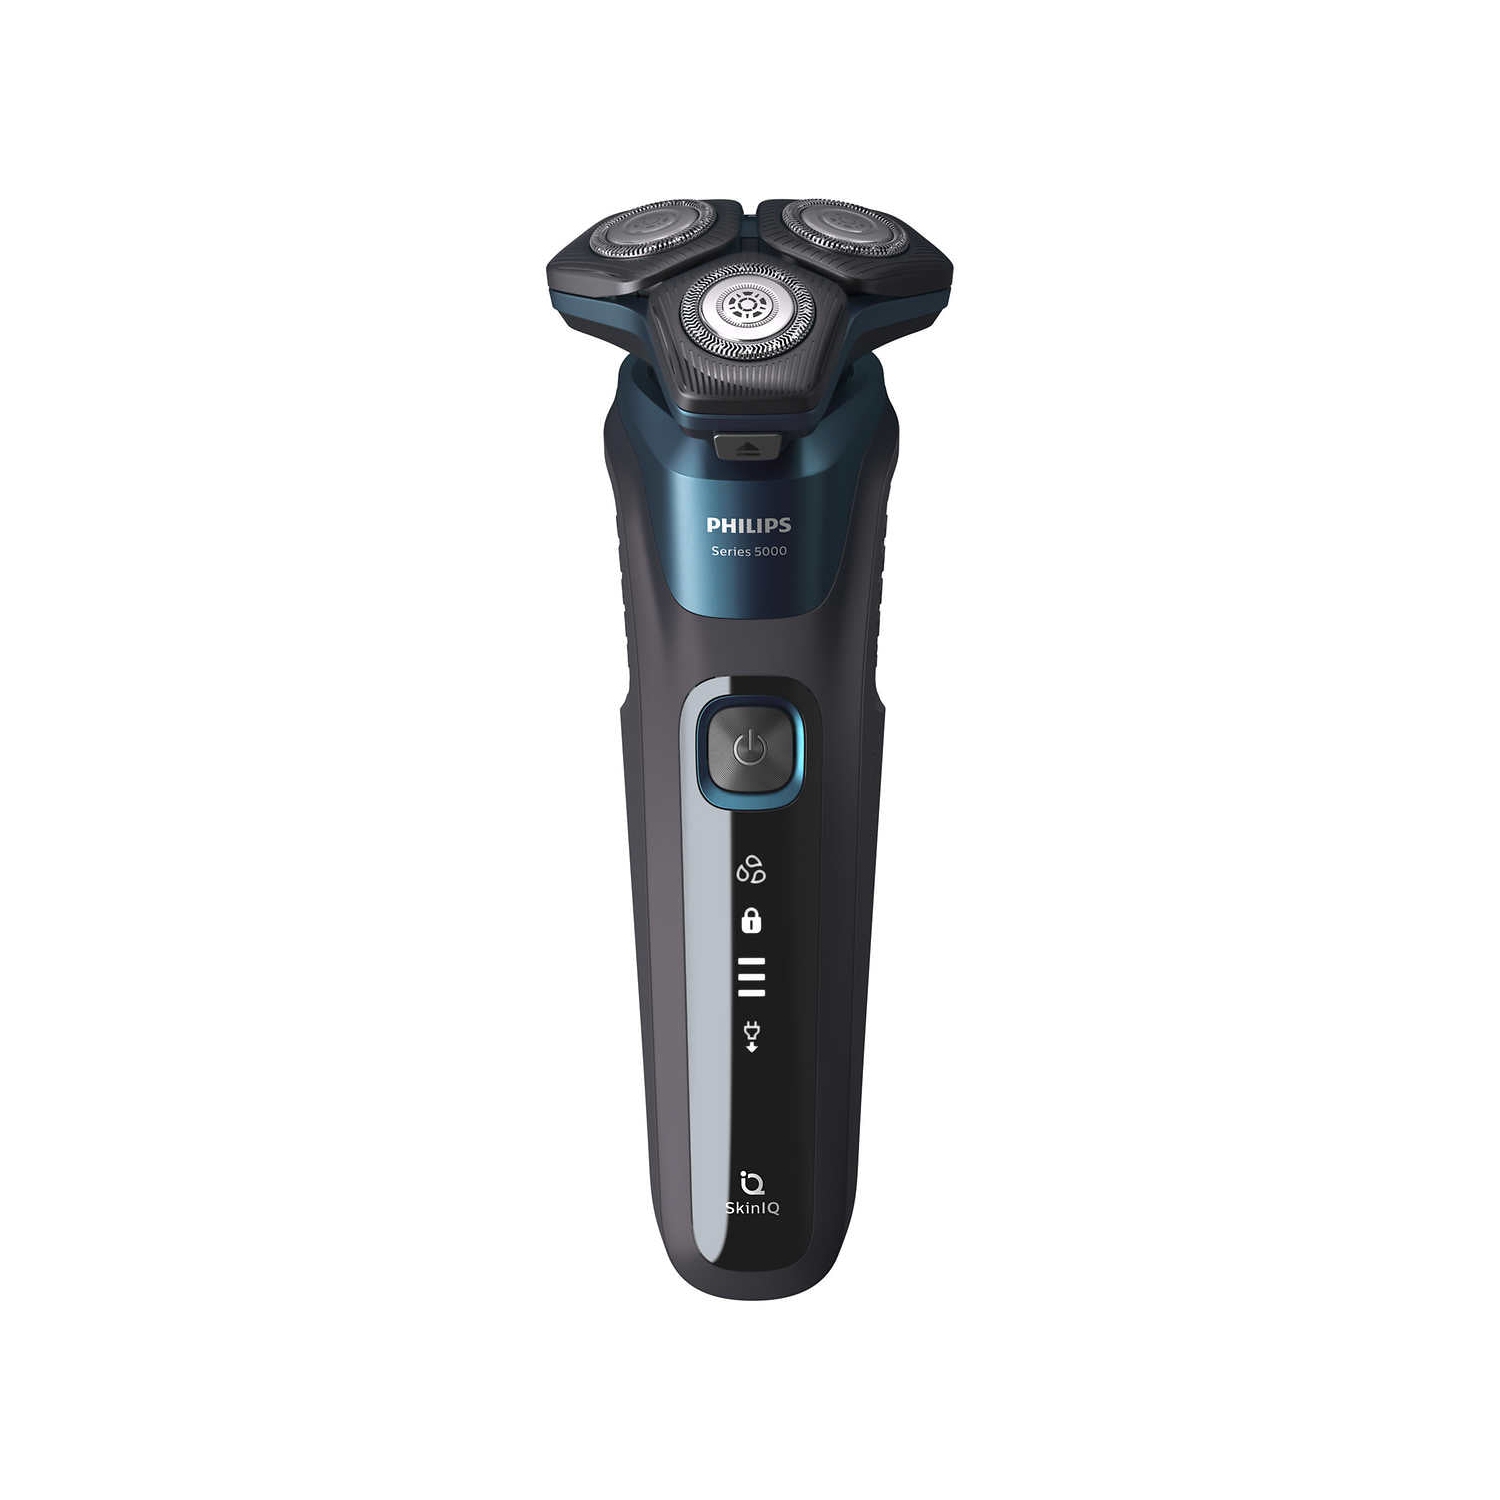 PHILIPS Series 5000 Wet & Dry Electric Shaver With Quick Clean Pod, Charging Stand, Travel Case, Replacement Heads, S5..